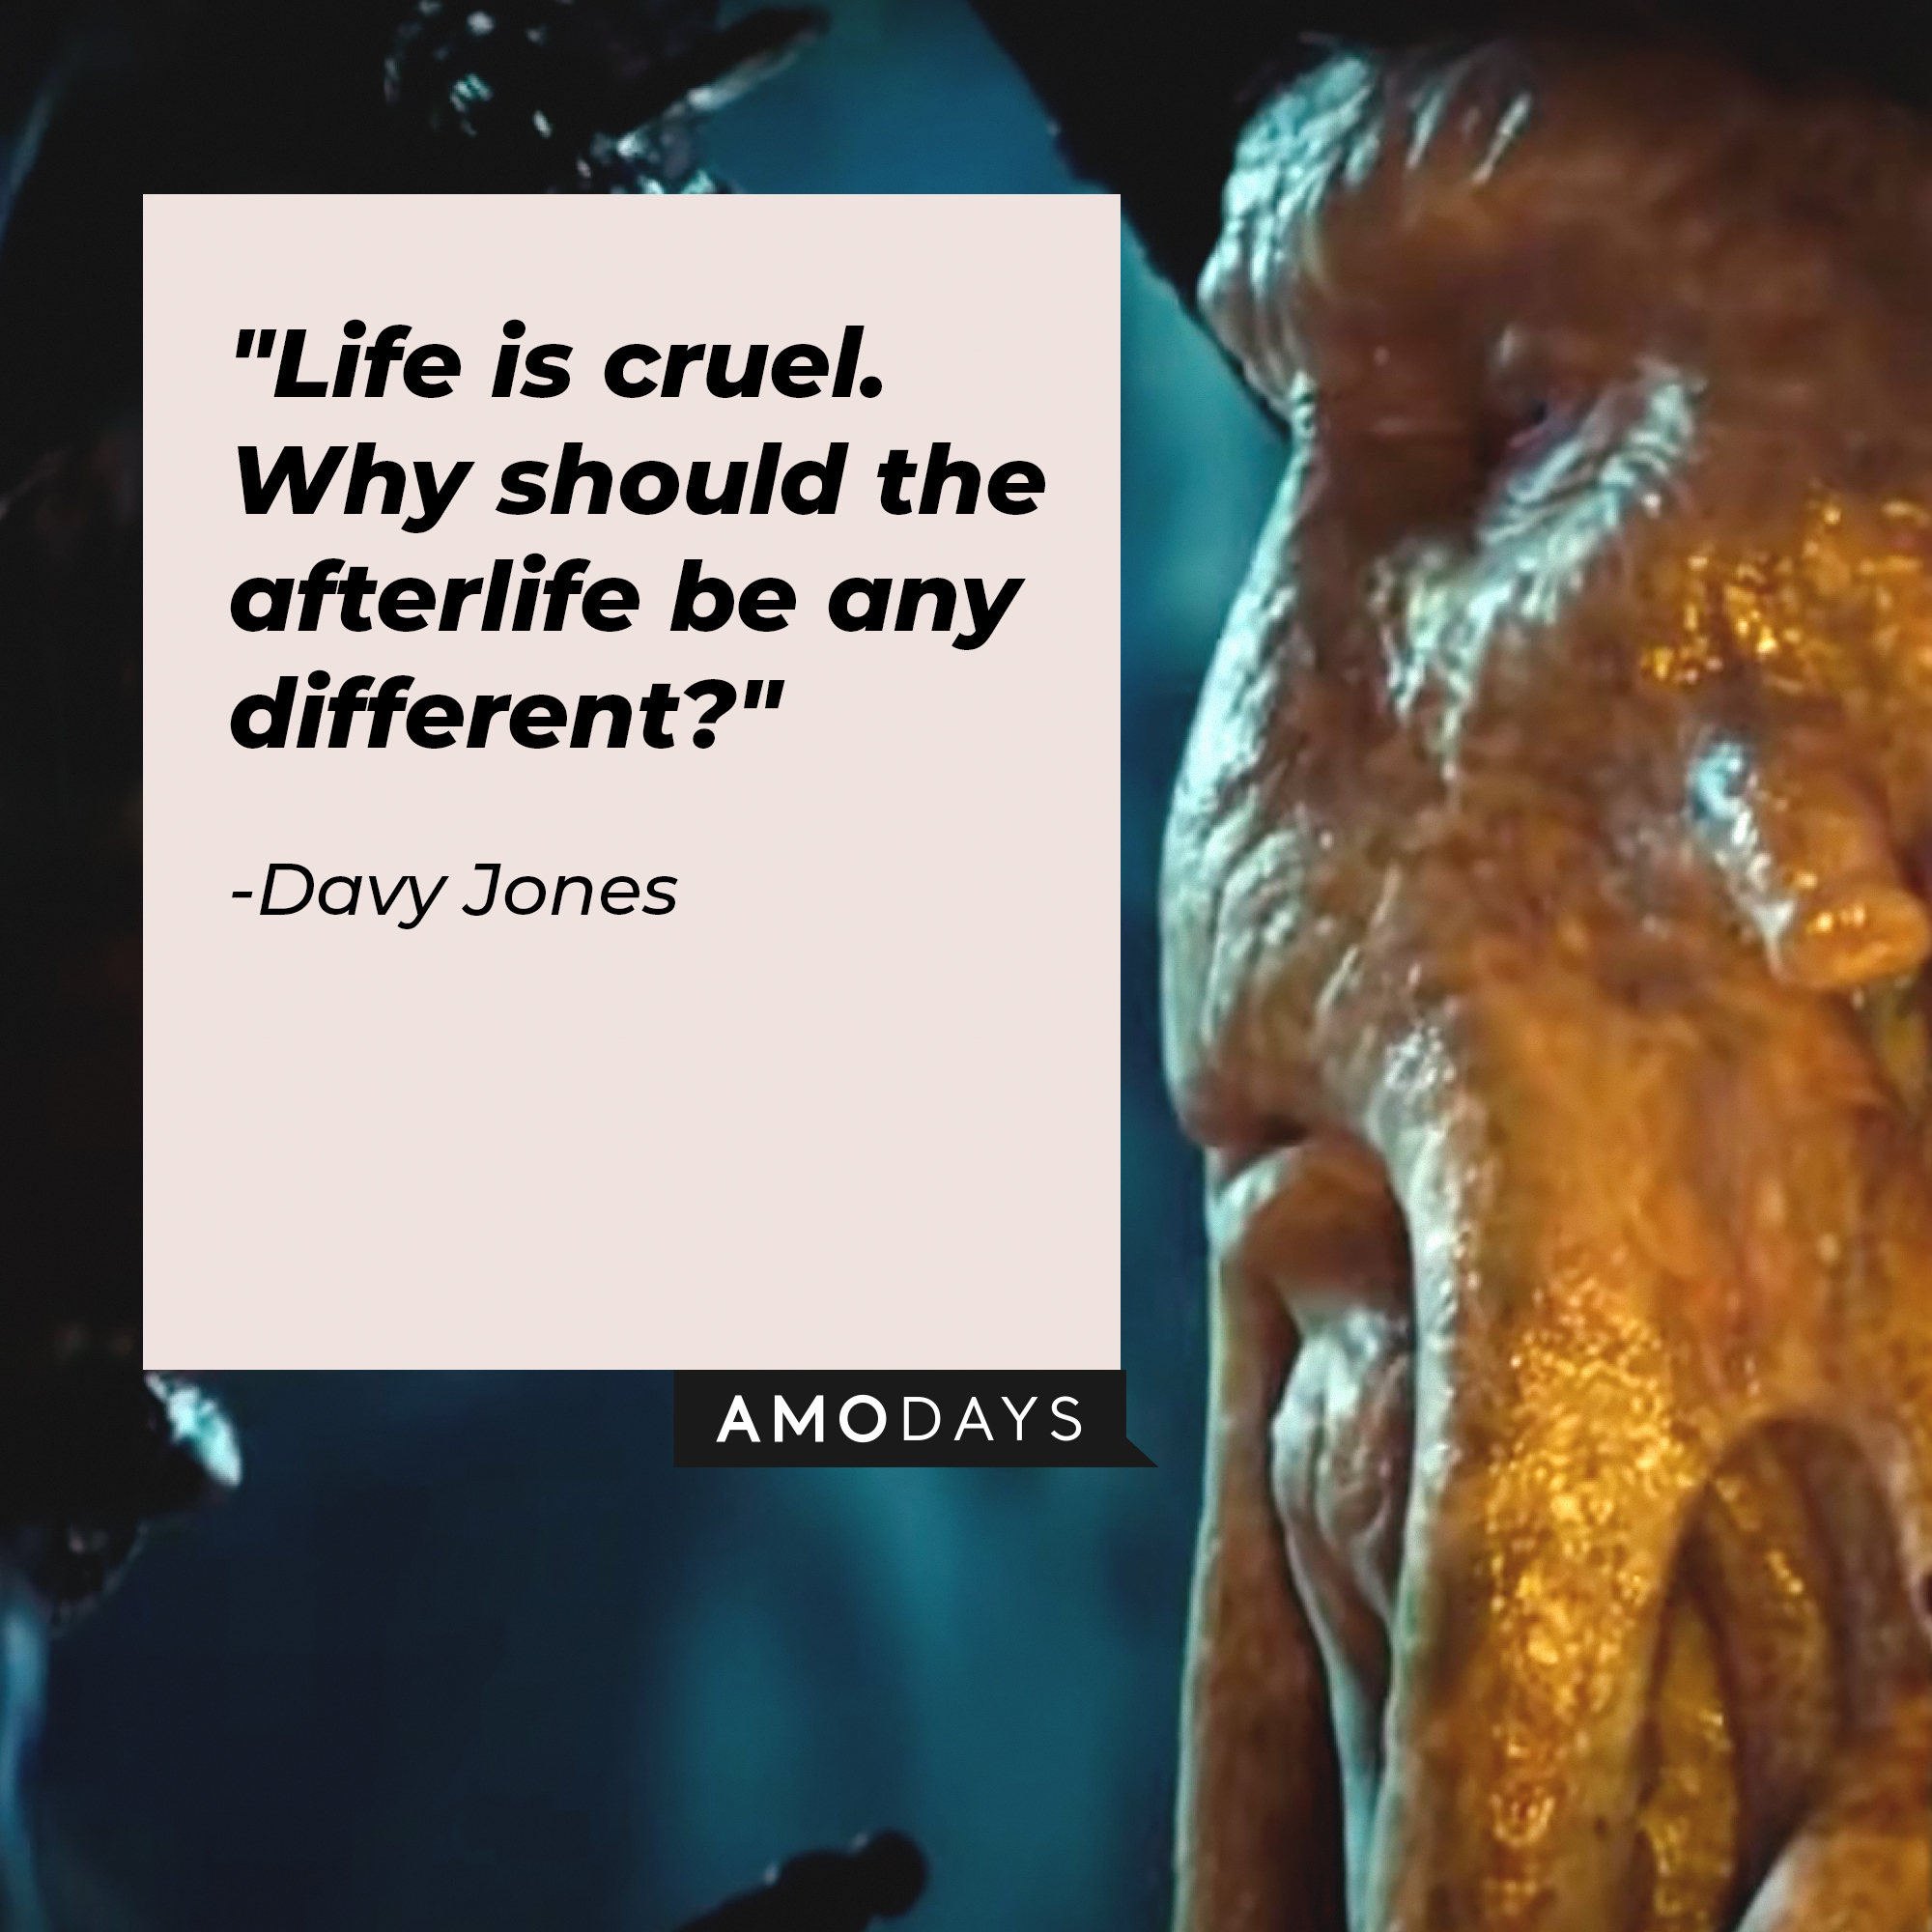 Davy Jones's quotes: "Life is cruel. Why should the afterlife be any different?" | Image: AmoDays